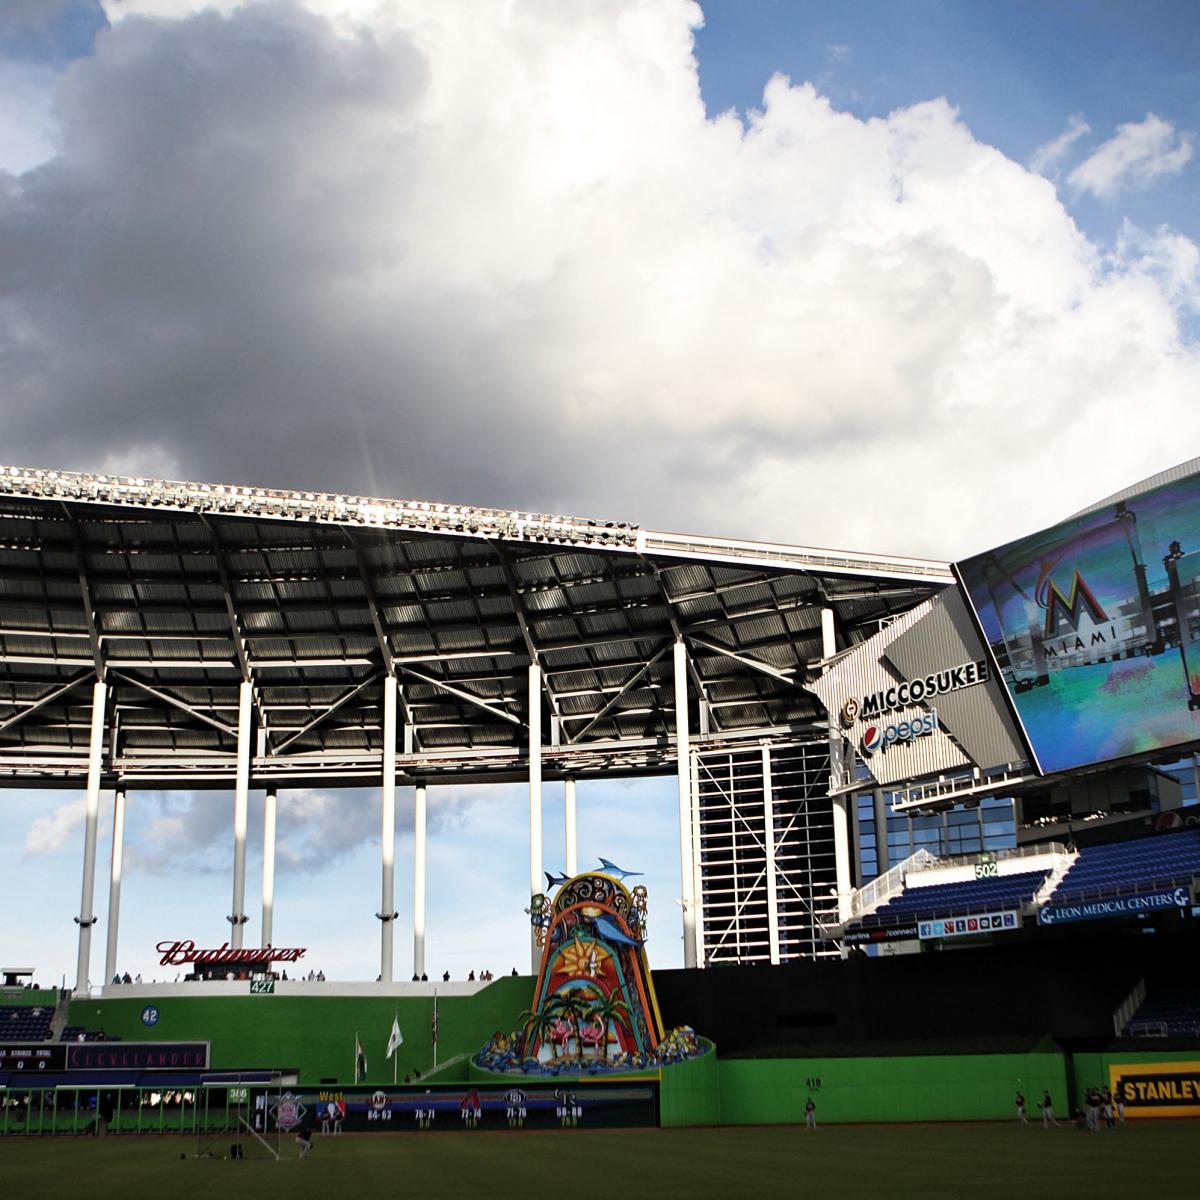 Marlins stumble on Opening Day as open roof leads to rain delay